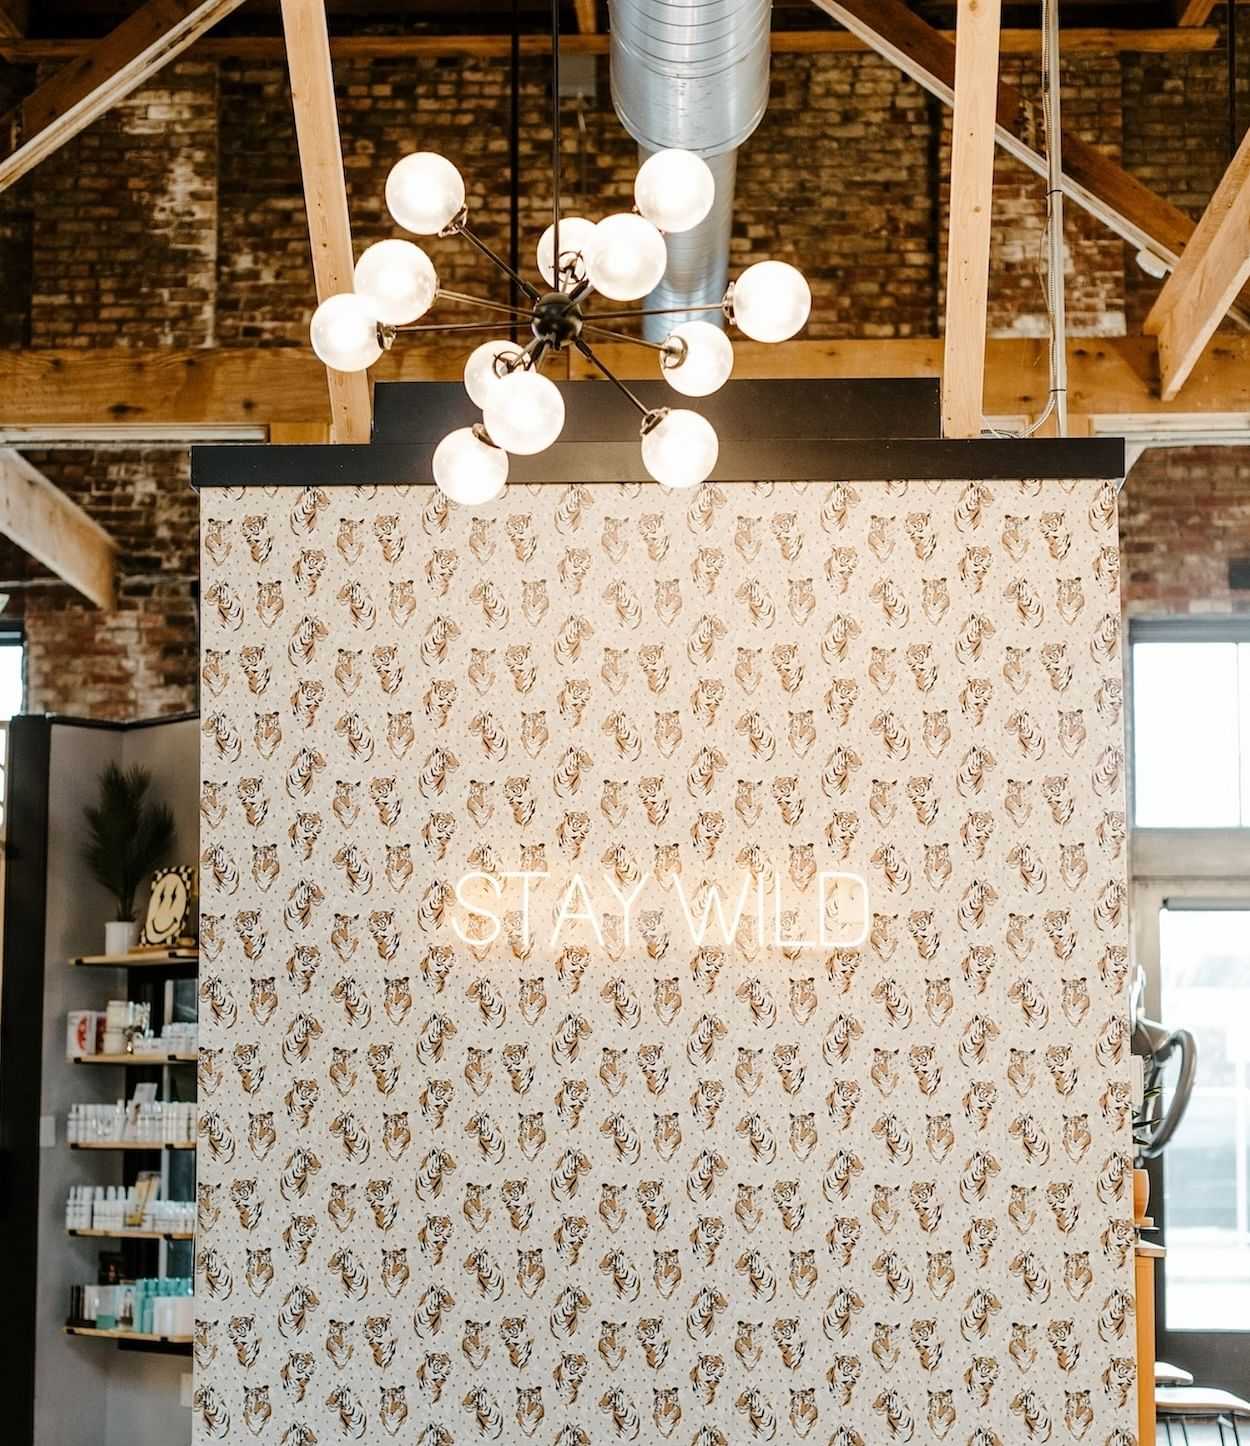 Wall divider with "STAY WILD" text under a modern chandelier.